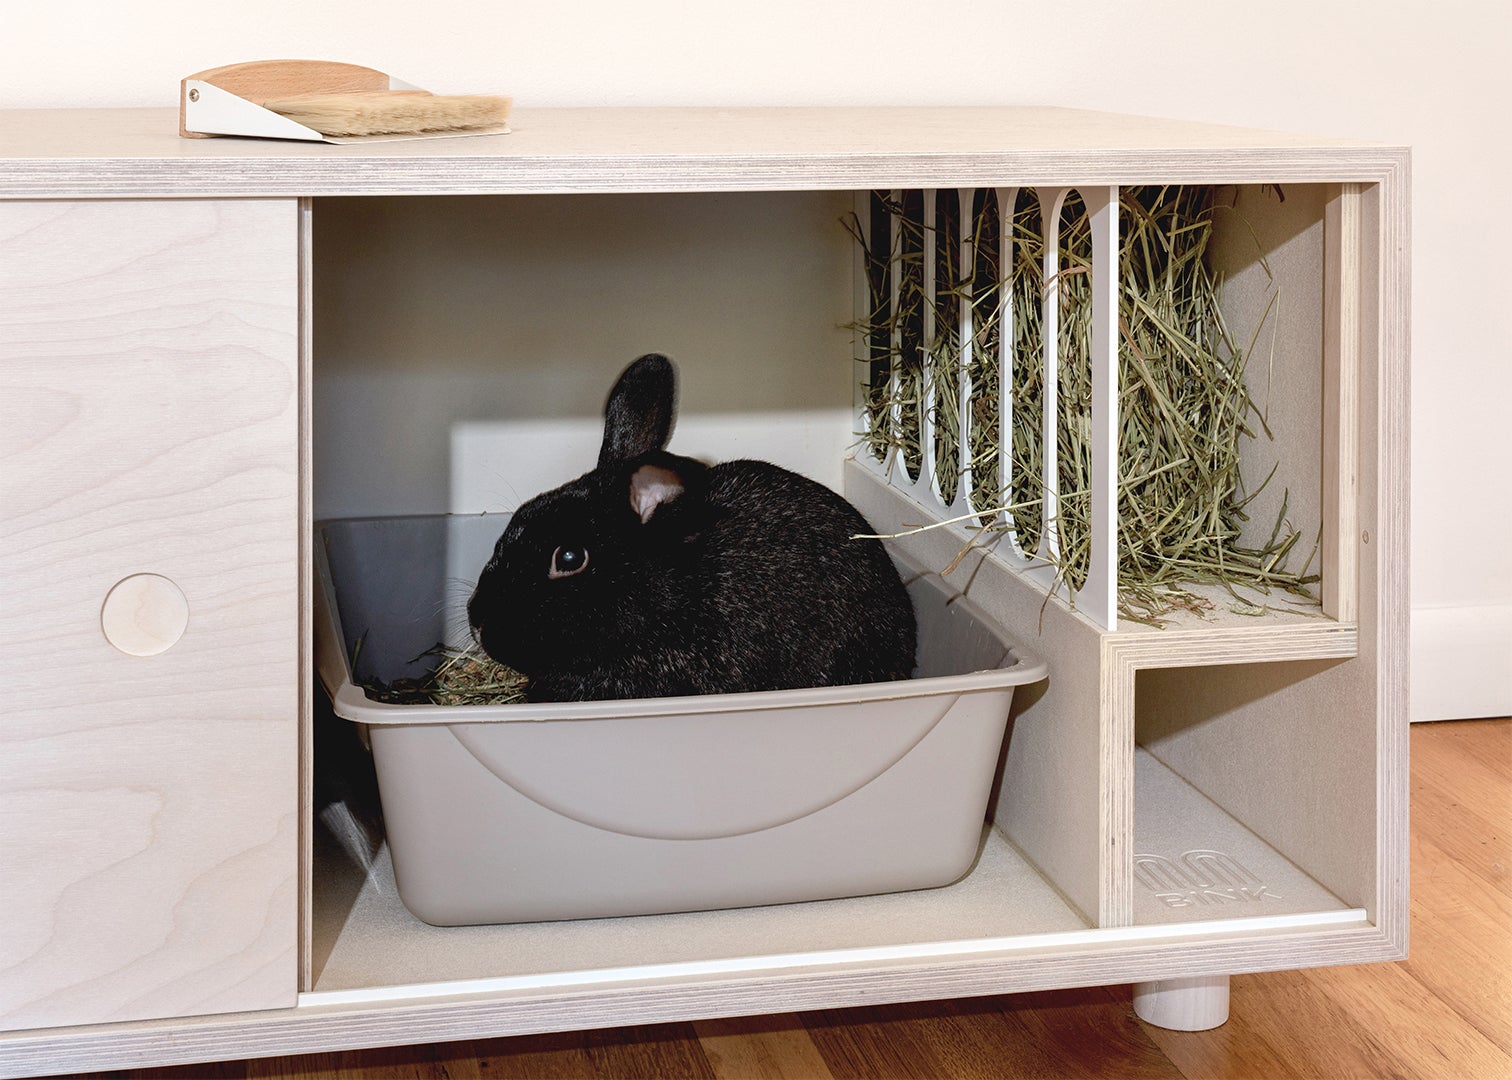 These Stylish Benches for Bunnies Solve Two Very Important Pet-Parent Problems